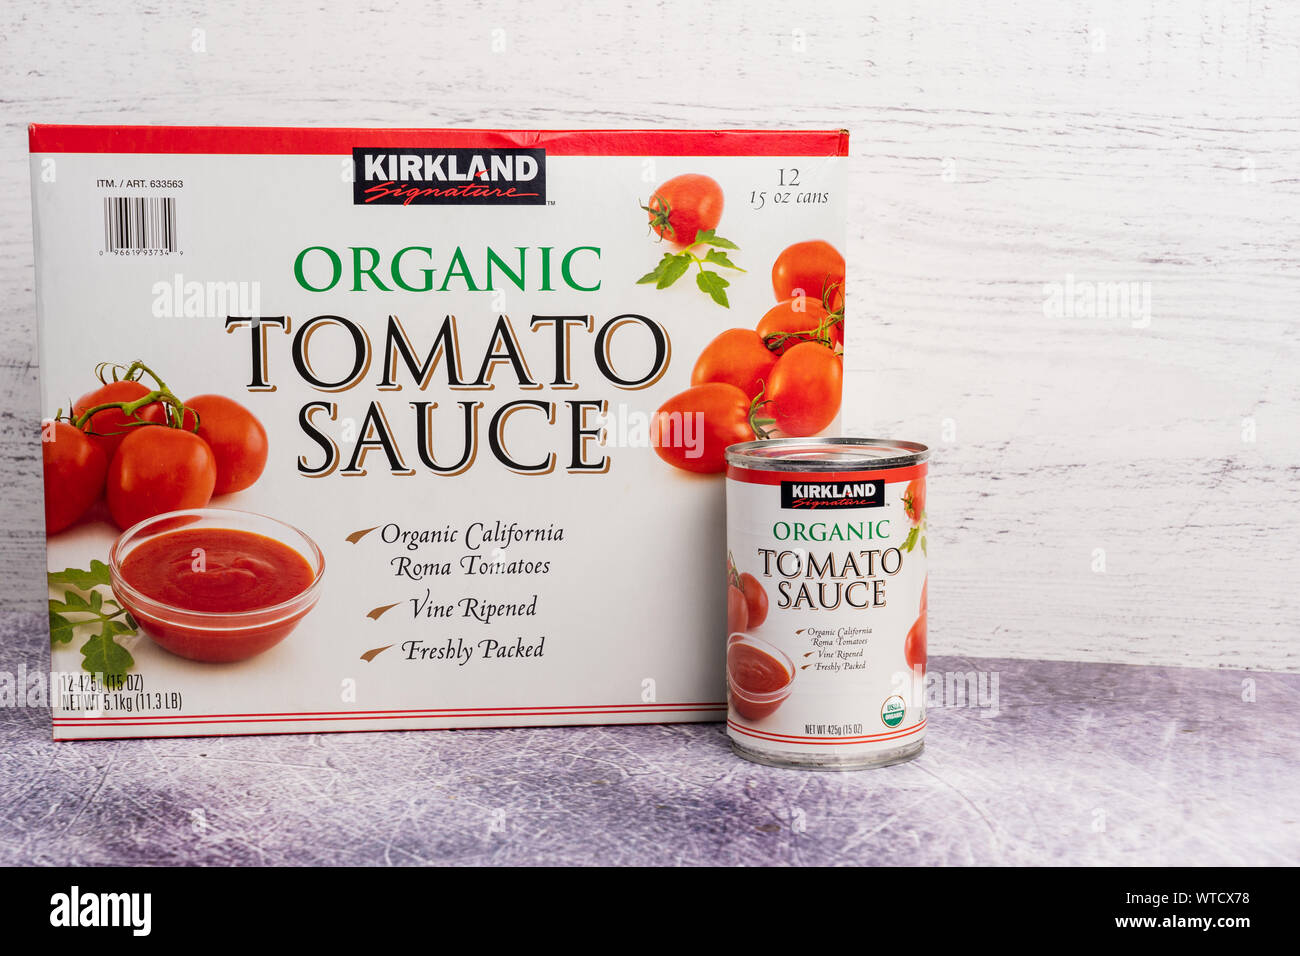 Worcester, PA - August 28, 2019: Kirkland Organic Tomato Sauce case of 12 cans is sold at Costco Wholesale at their warehouse club stores. Stock Photo